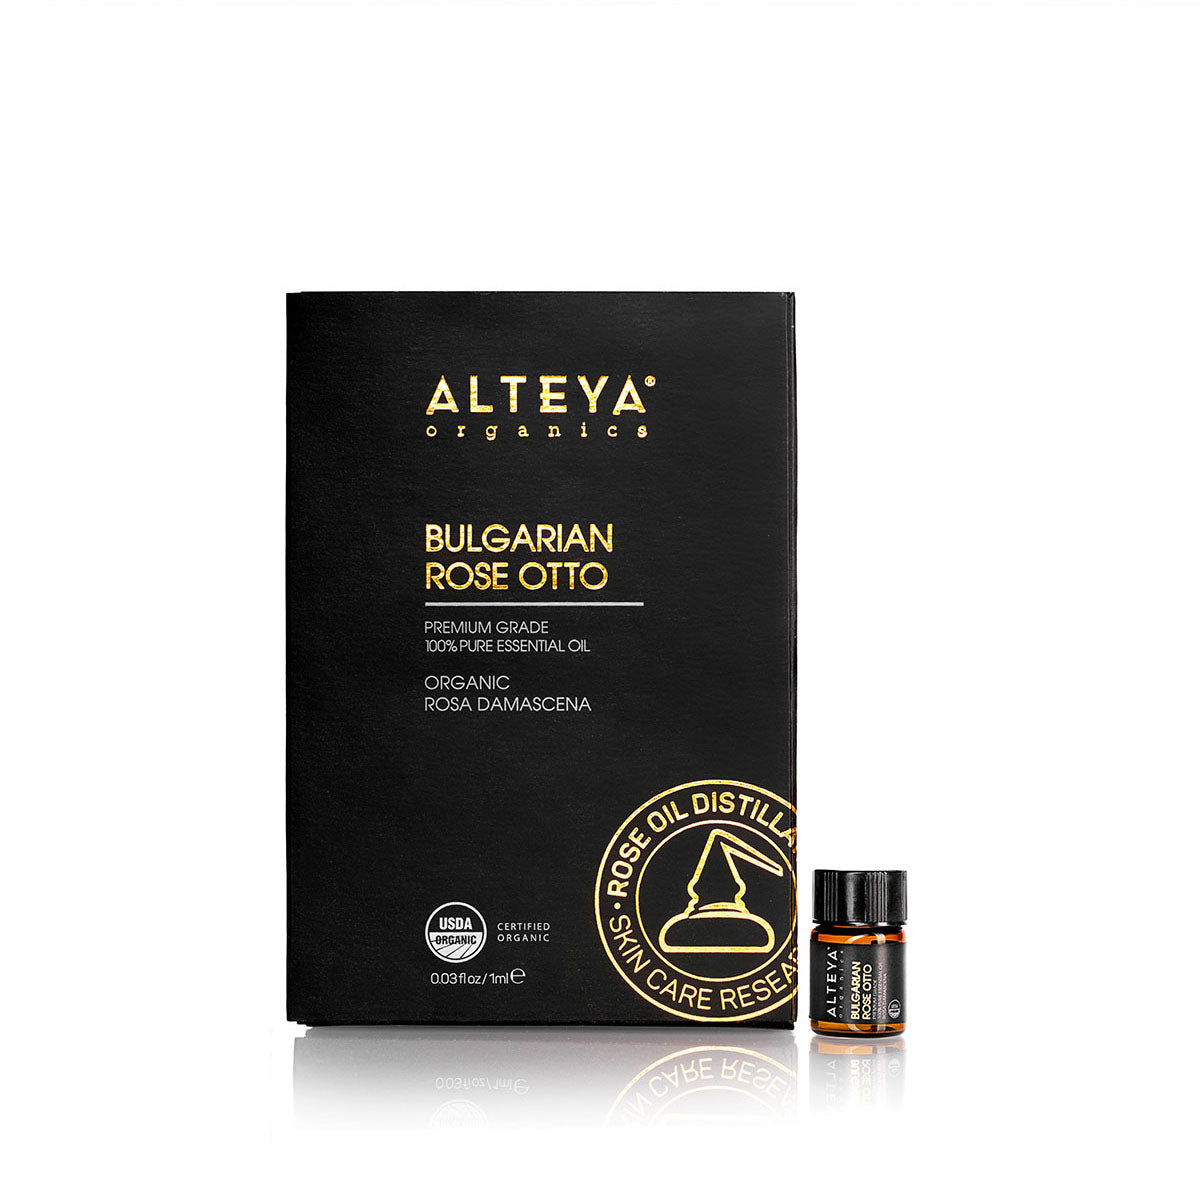 Alteya’s Rose Essential Oil is certified organic according to the strict USDA, National Organic Program standards. Our organic roses are grown without the use of pesticides, herbicides, or any other harmful additives.